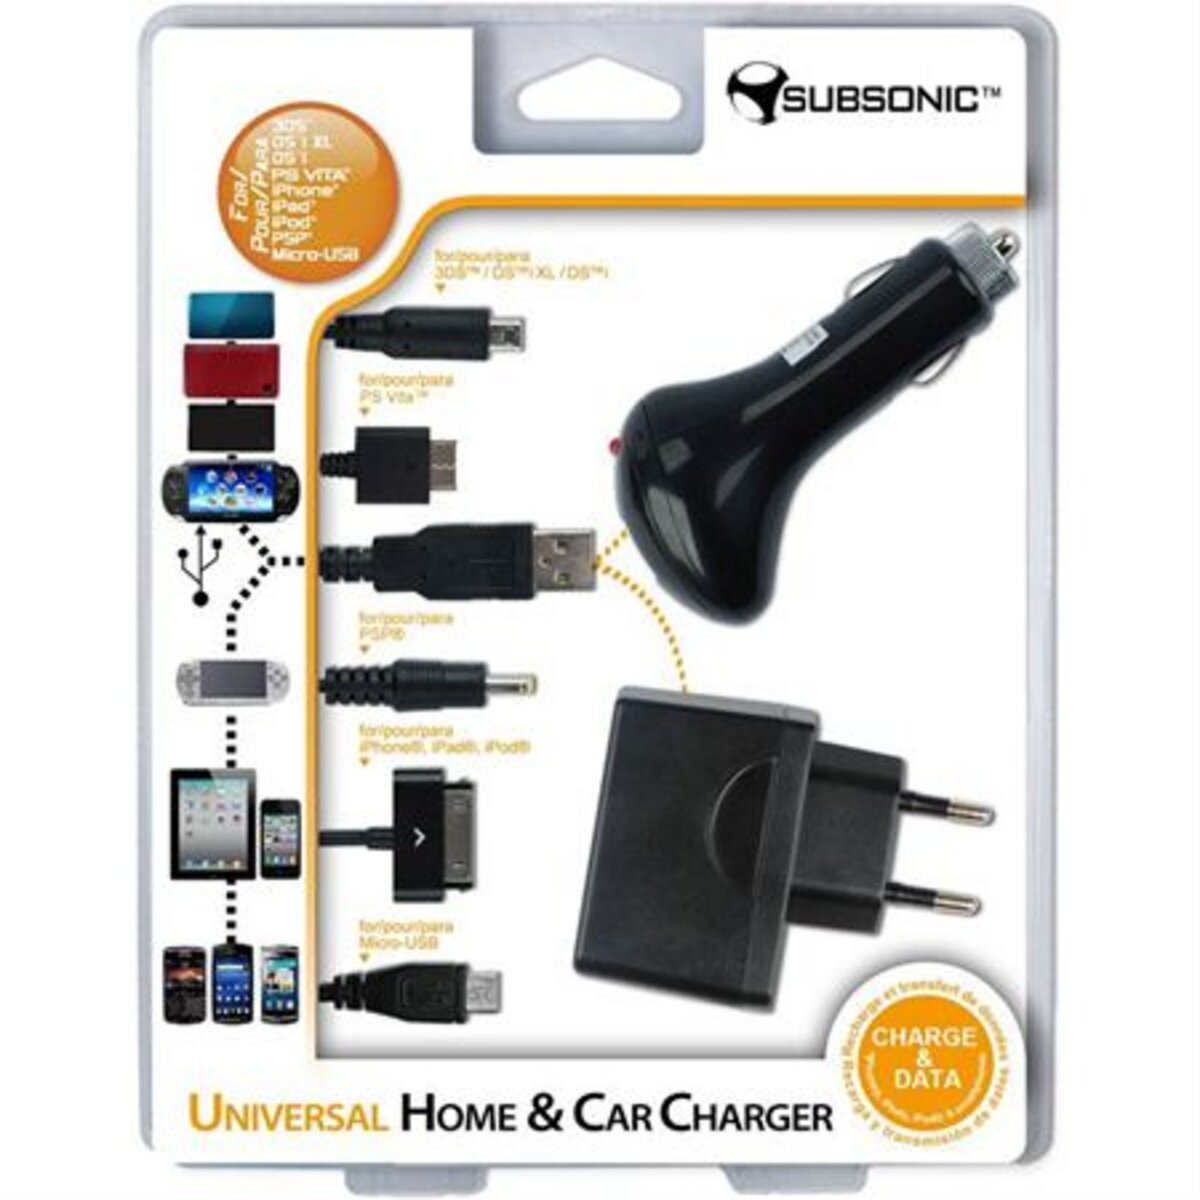 Chargeur Universel - 3DS - PS Vita - iPhone